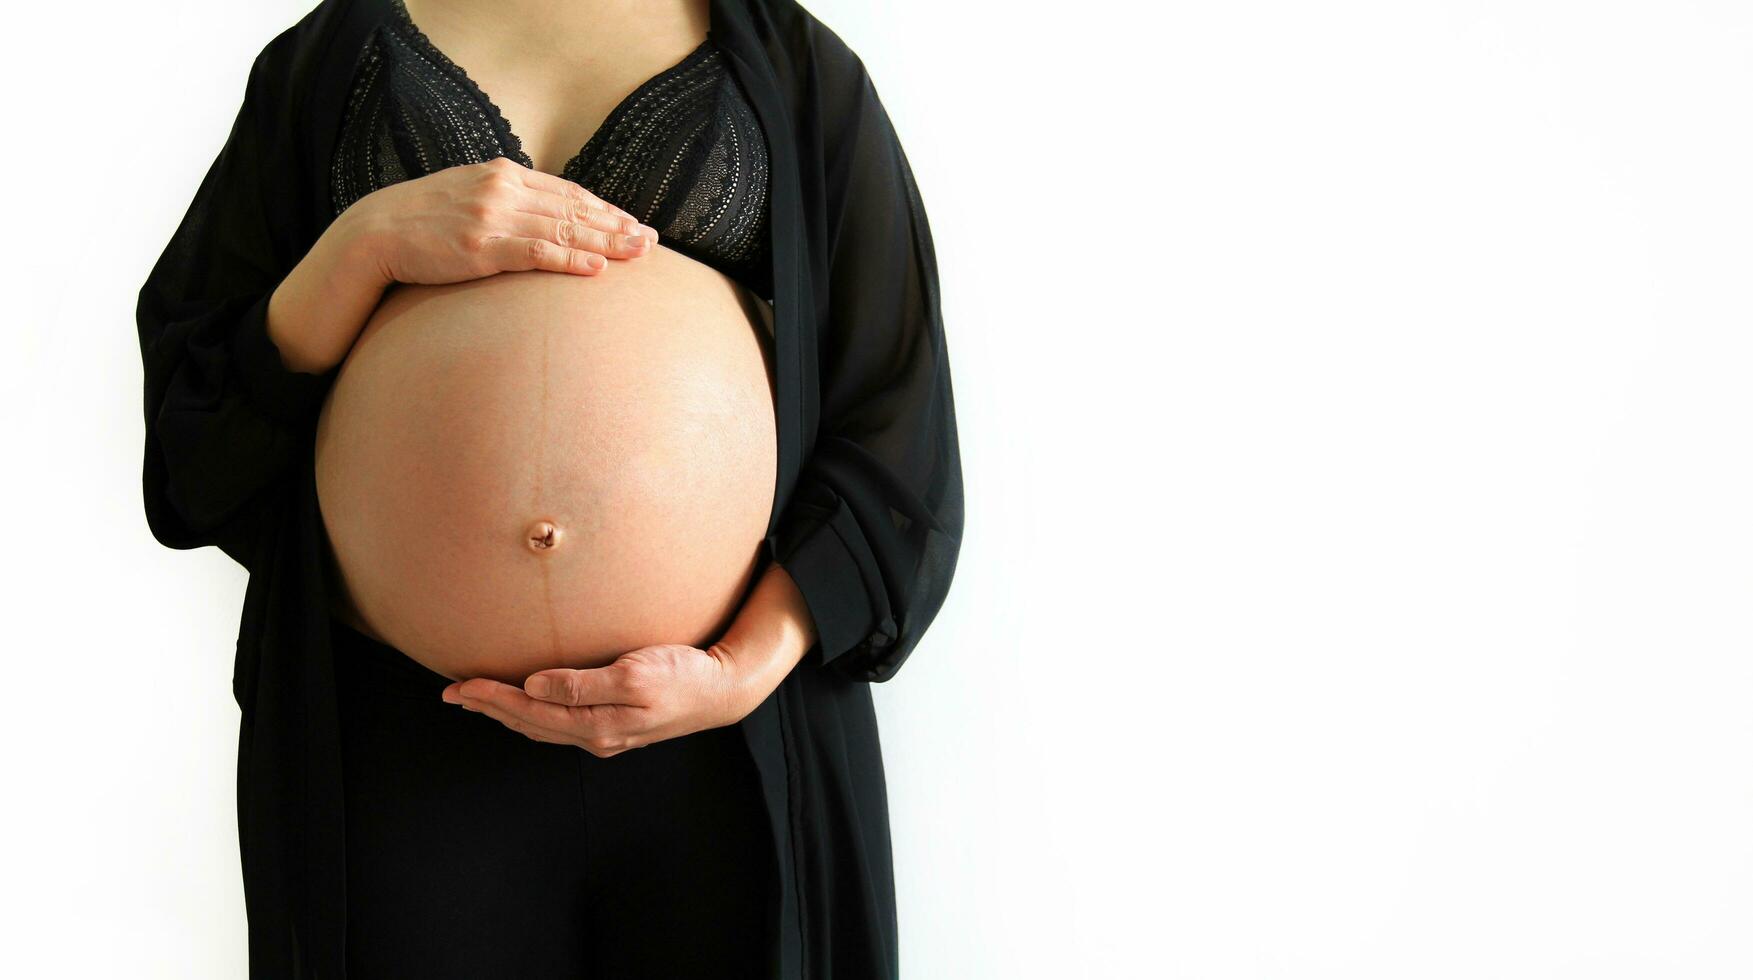 Pregnant woman wearing black dress and holds hands on swollen belly isolated on white background and copy space with clipping path. Pregnancy 7-9 months, motherhood, love, expectation and care baby. photo